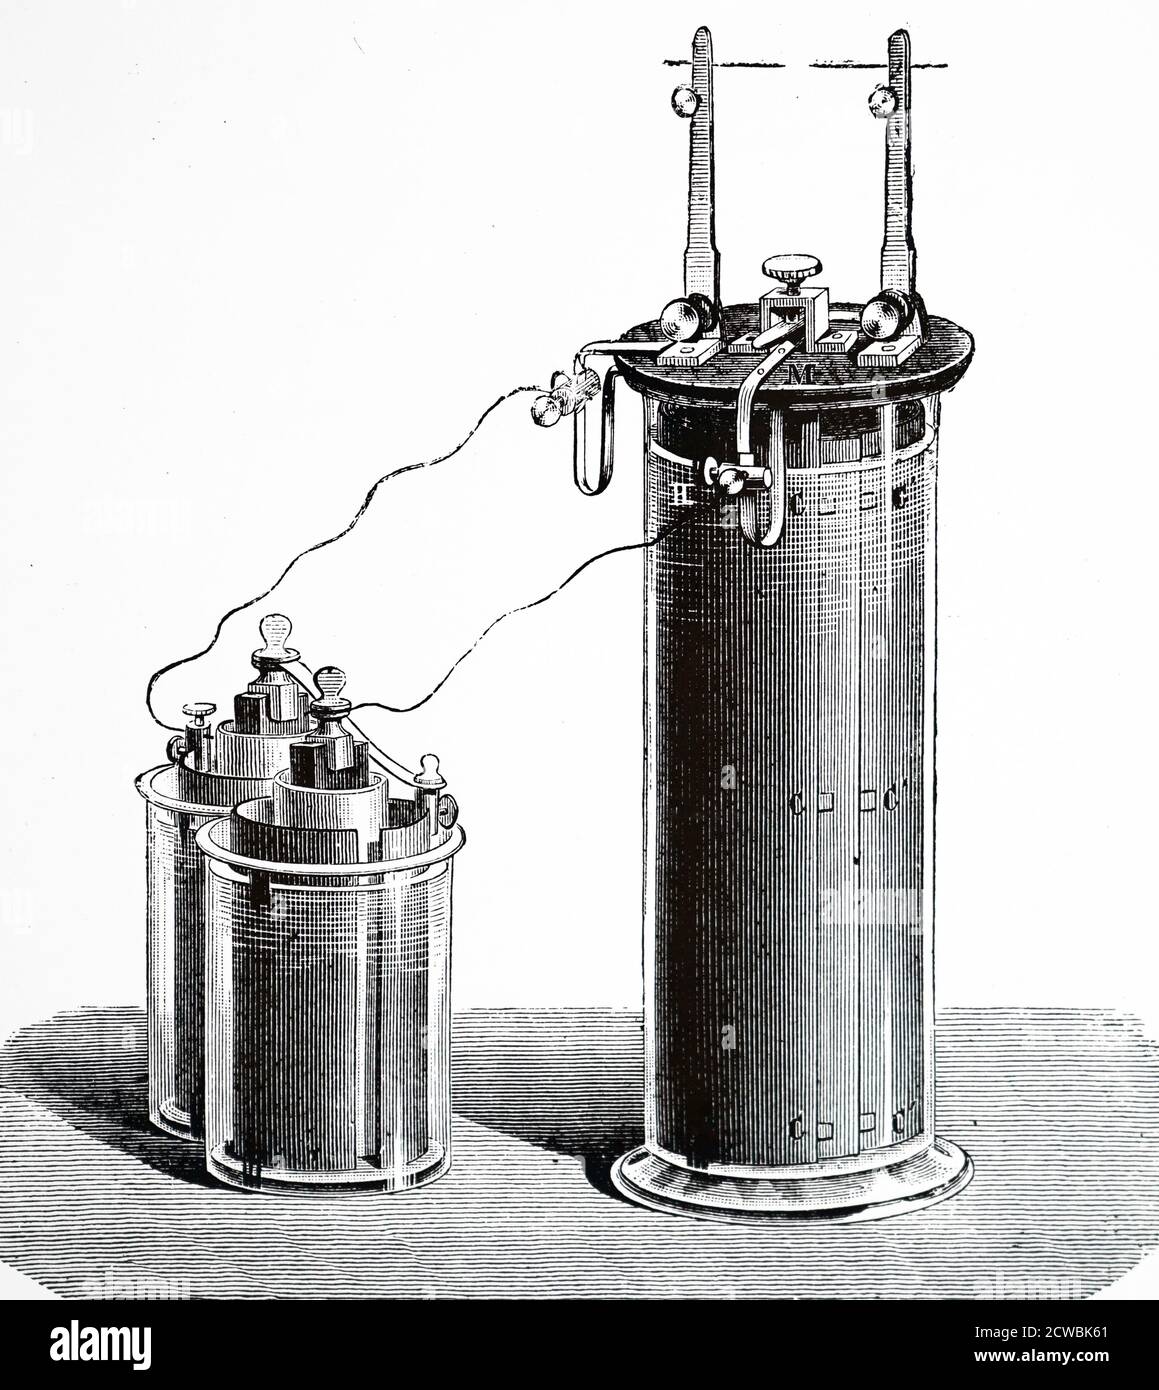 Engraving depicting a secondary battery. Plante cell (accumulator) of 1860: glass vessel containing spiral lead plates in dilute sulphuric acid. Shown here being charged by two Bunsen cells. Stock Photo